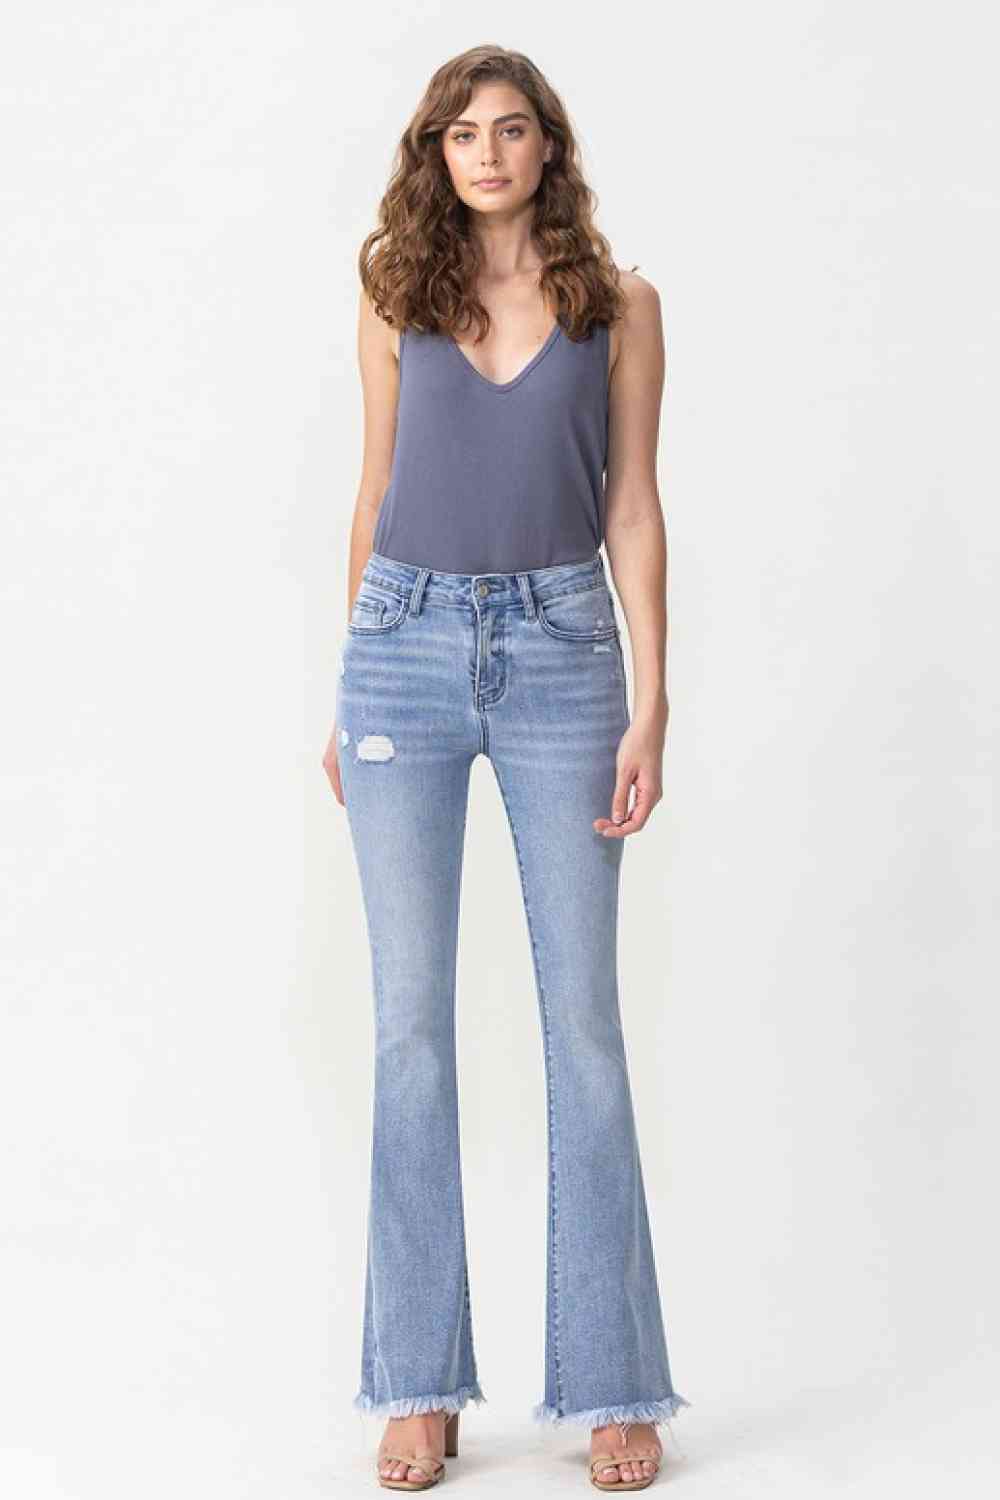 Full Size Evie High Rise Fray Flare Jeans - Kawaii Stop - Casual Style, Comfortable Fit, Distressed Details, Fashion Forward, Full Size Range, Must-Have Jeans, Off-Season Mega Sale, Ship from USA, Trendy Fashion, Vervet, Weekend Chic, Women's Wardrobe